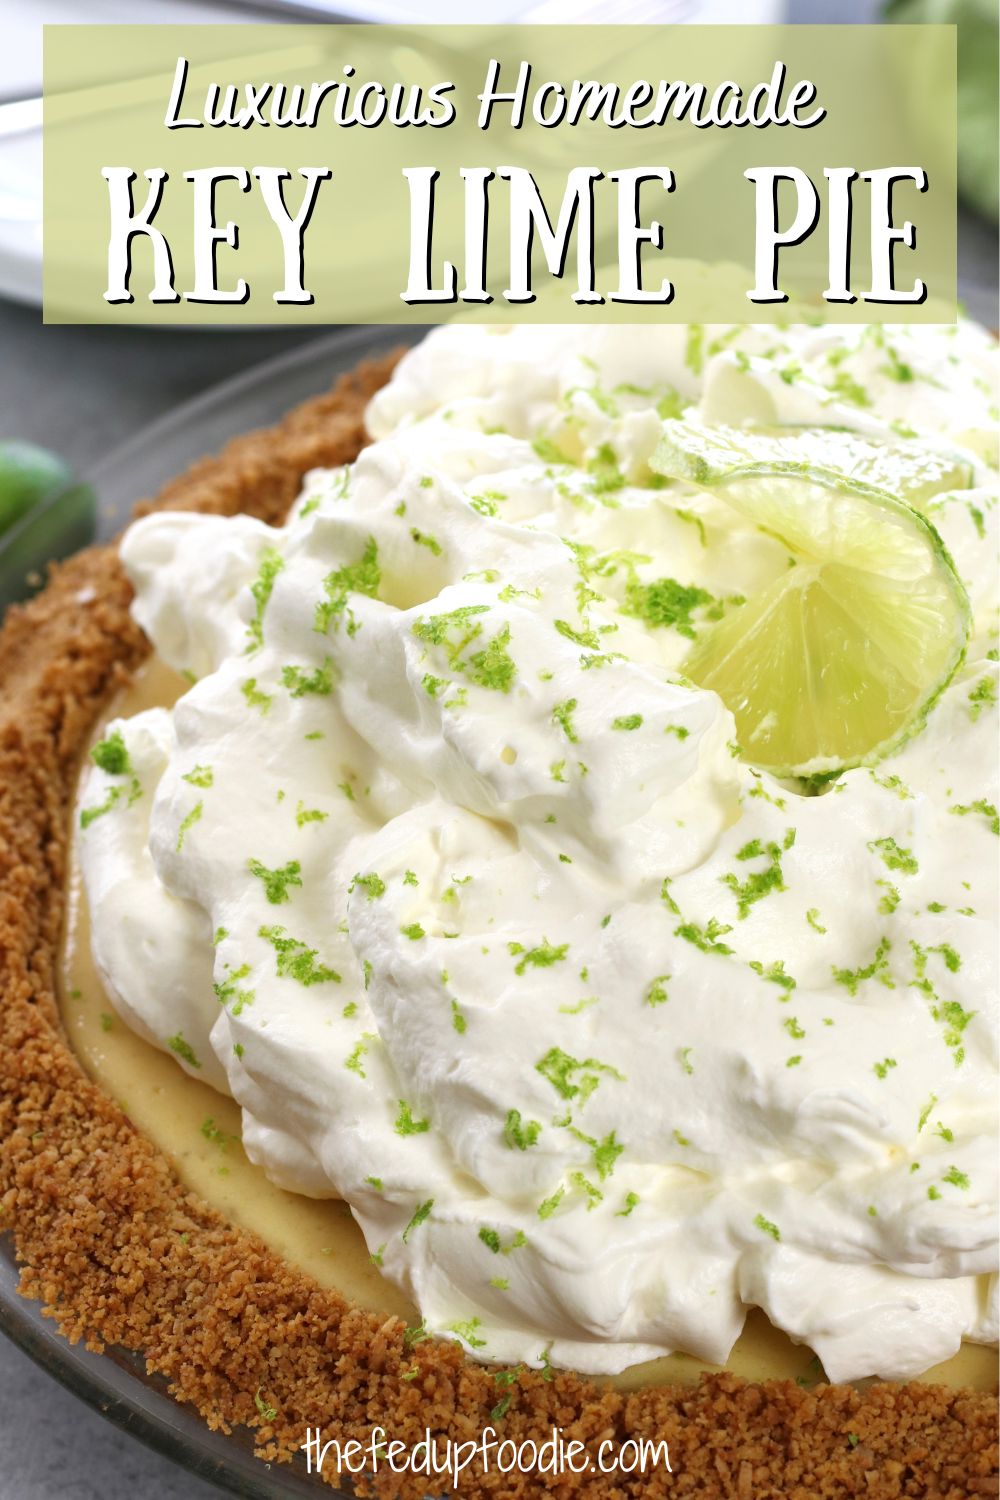 One of the easiest desserts for Summer, Easter and Thanksgiving, this Key Lime Pie recipe has a sweet and tangy key lime custard inside a crunchy graham and coconut crust and is topped with a fluffy lime whipped cream. This is the perfect dessert for anyone who loves citrus. 
#KeyLimePie #KeyLimeDesserts #LimePieRecipe #EasyKeyLimePie #EasyKeyLimePieRecipeCondensedMilk #BestKeyLimePie #KeyLimePieEasy